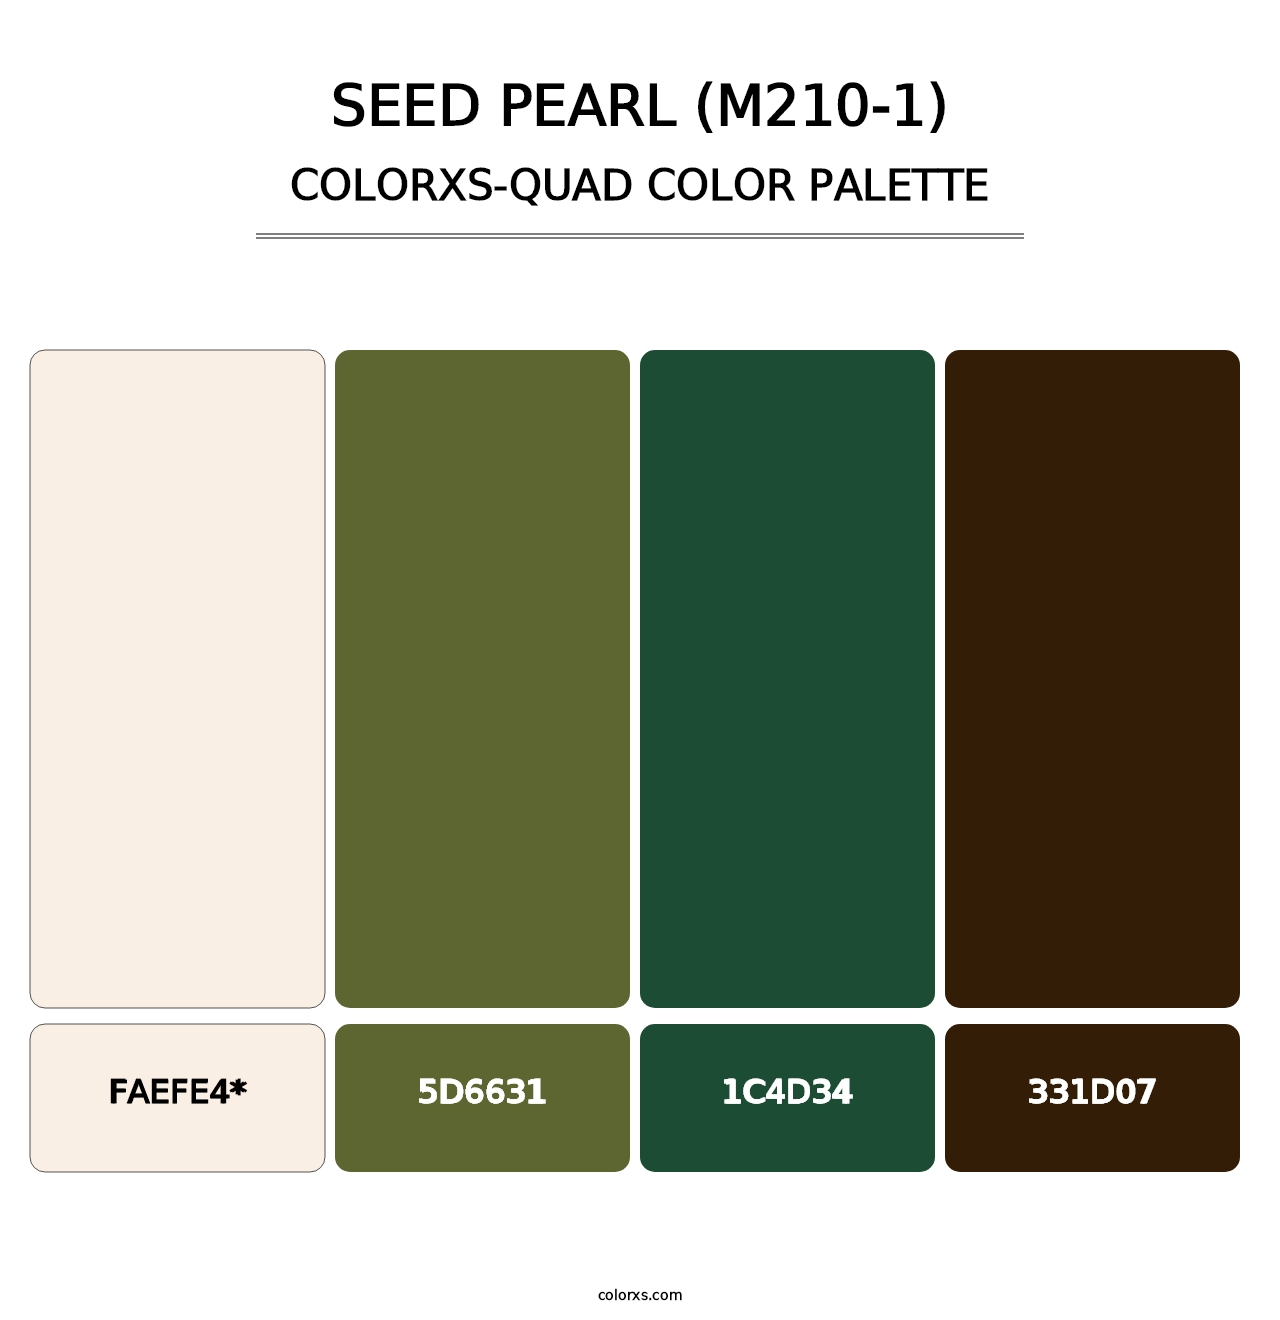 Seed Pearl (M210-1) - Colorxs Quad Palette